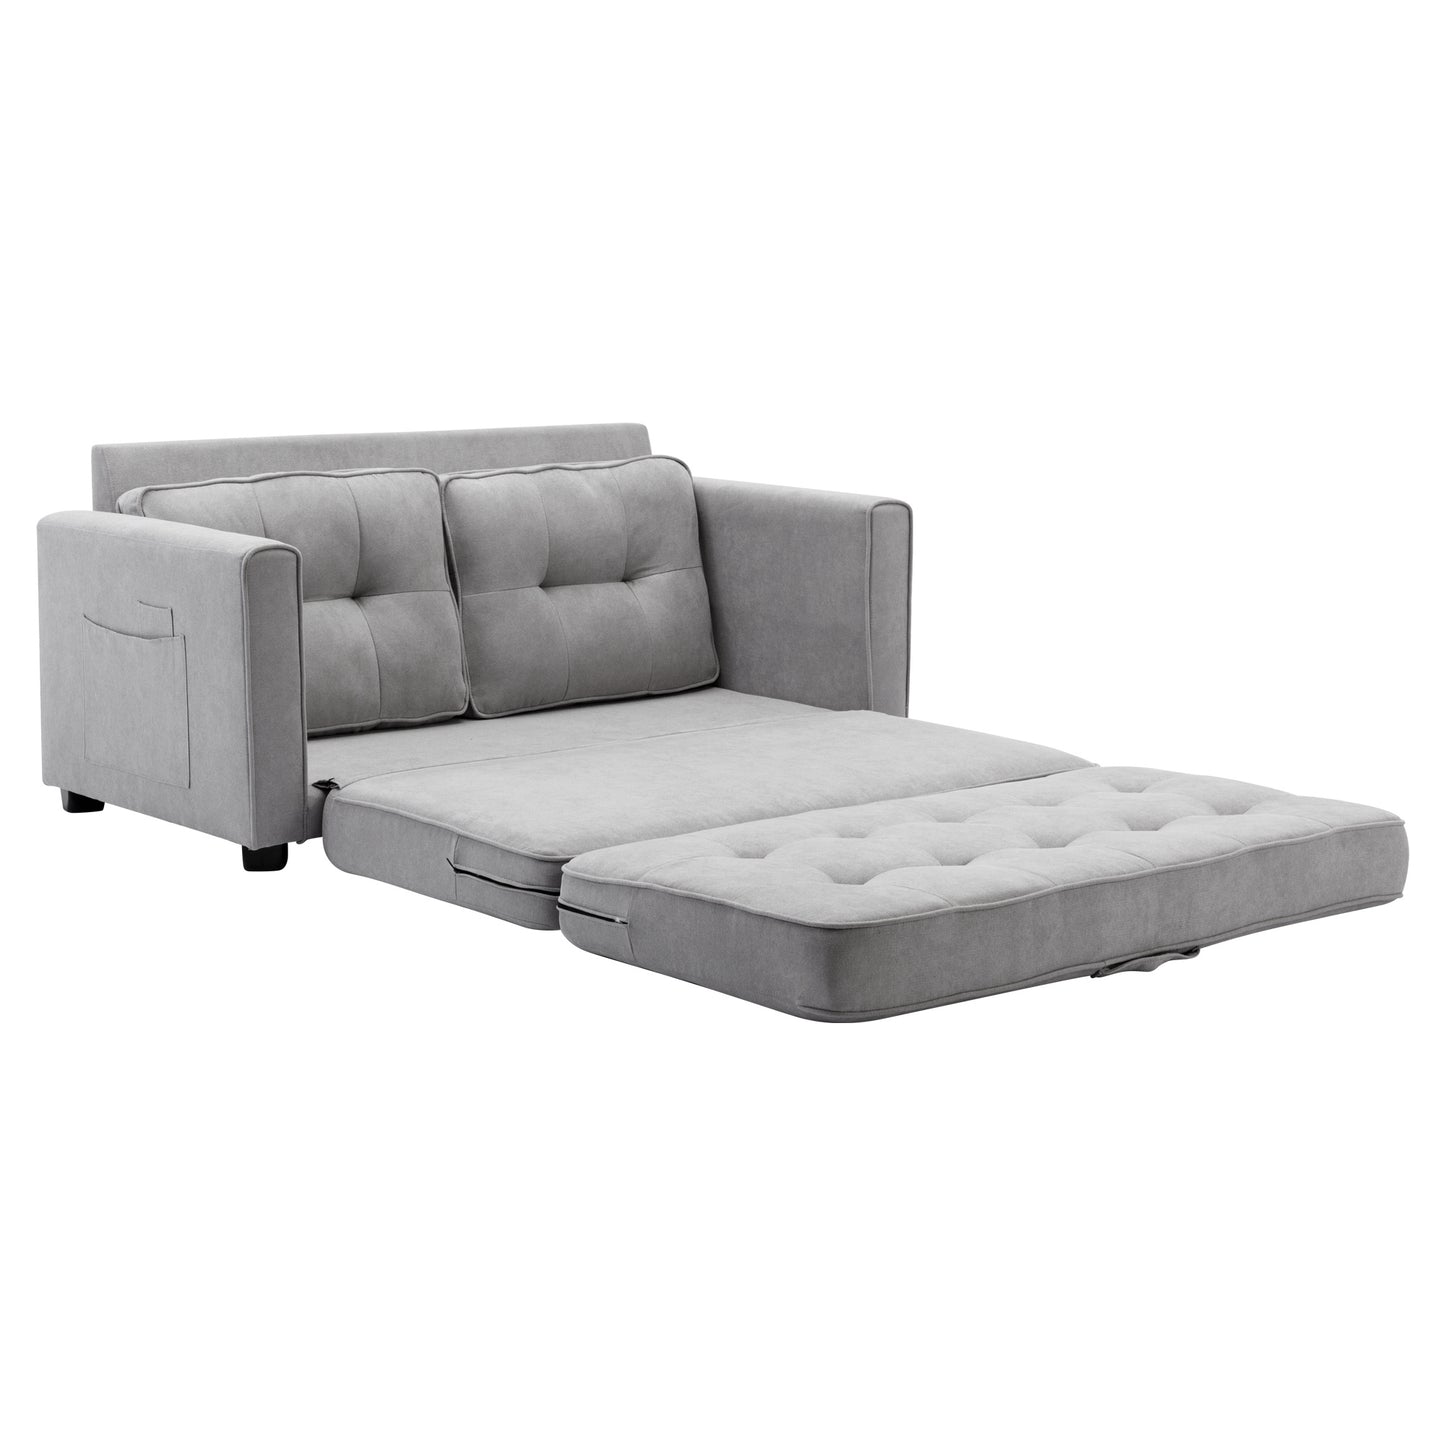 59.4" Loveseat Sofa with Pull-Out Bed Modern Upholstered Couch with Side Pocket for Living Room Office, Grey